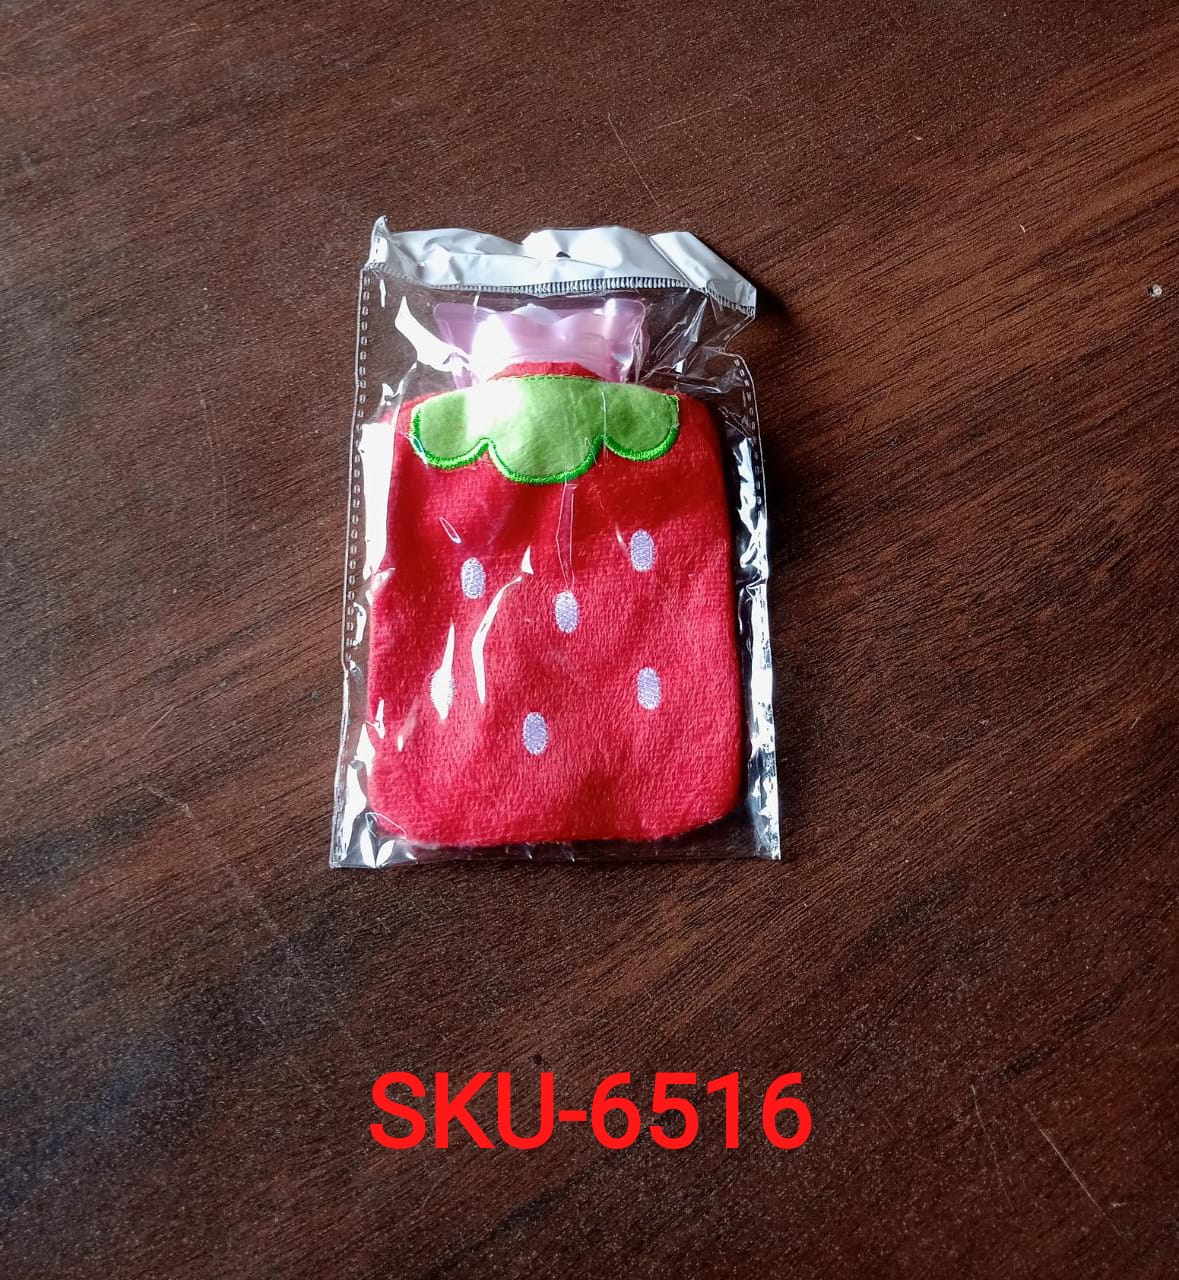 6516 Strawberry small Hot Water Bag with Cover for Pain Relief, Neck, Shoulder Pain and Hand, Feet Warmer, Menstrual Cramps.